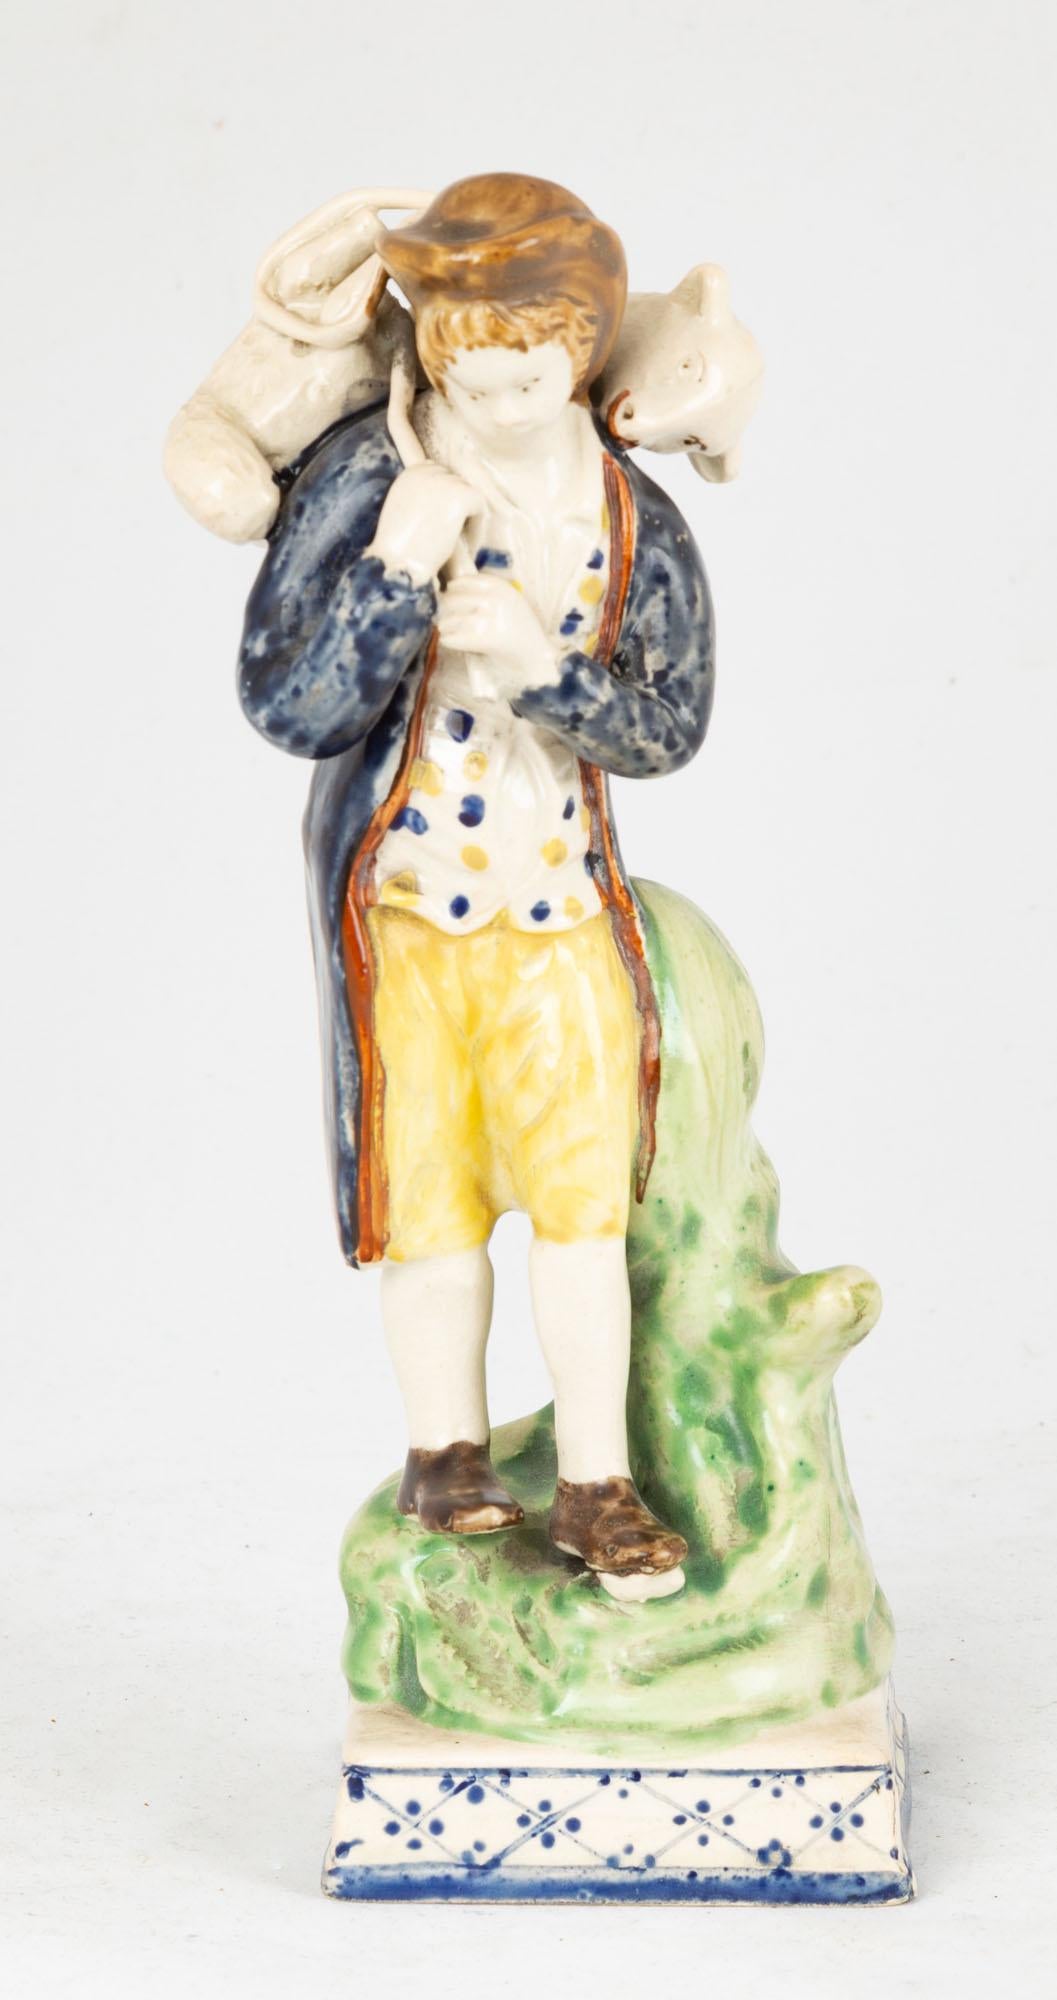 Staffordshire pottery figure, antique Staffordshire, Parable of the Lost Sheep, 